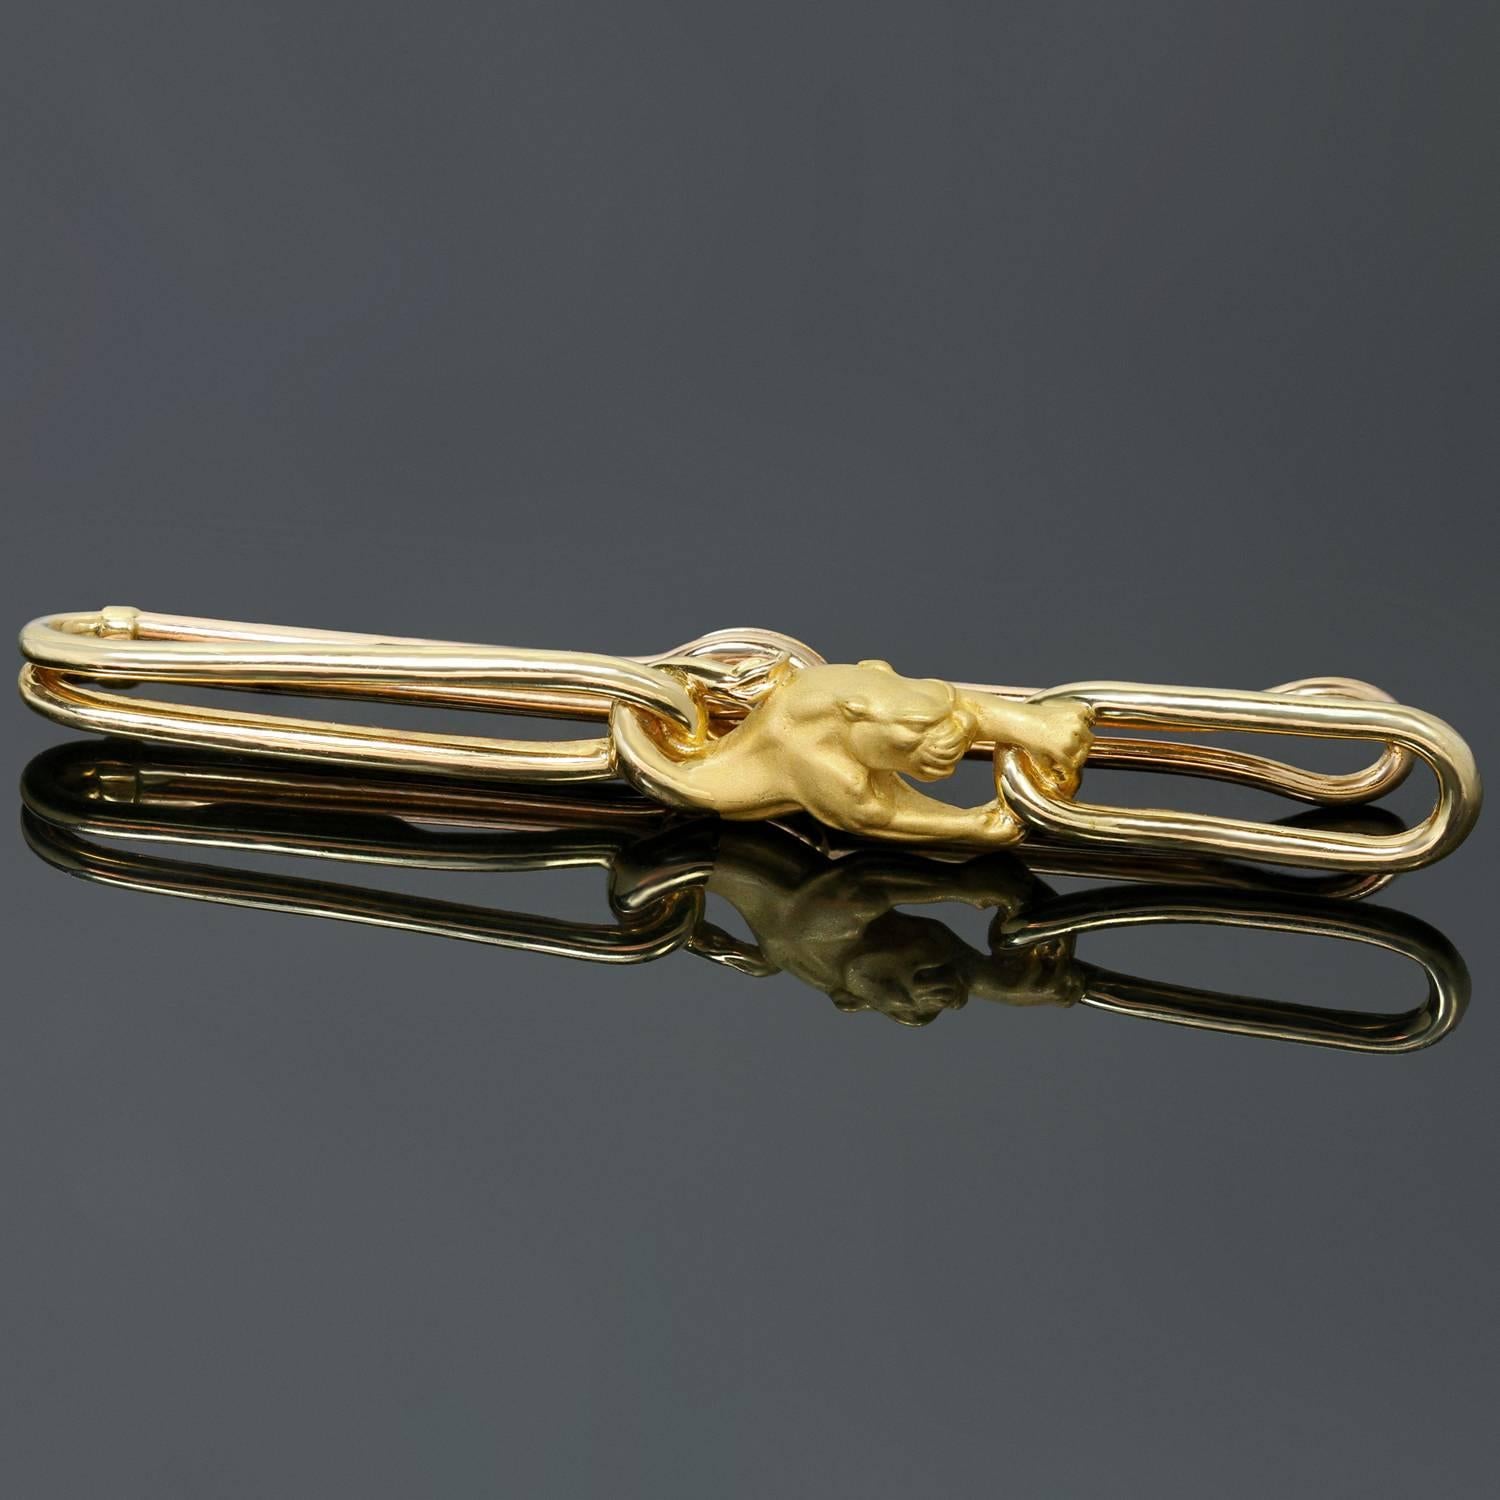 This gorgeous Carrera y Carrera tie bar pin features a chic panther design crafted in 18k yellow gold with polished and satin finishes. Made in Spain circa 1990s. Measurements: 0.27